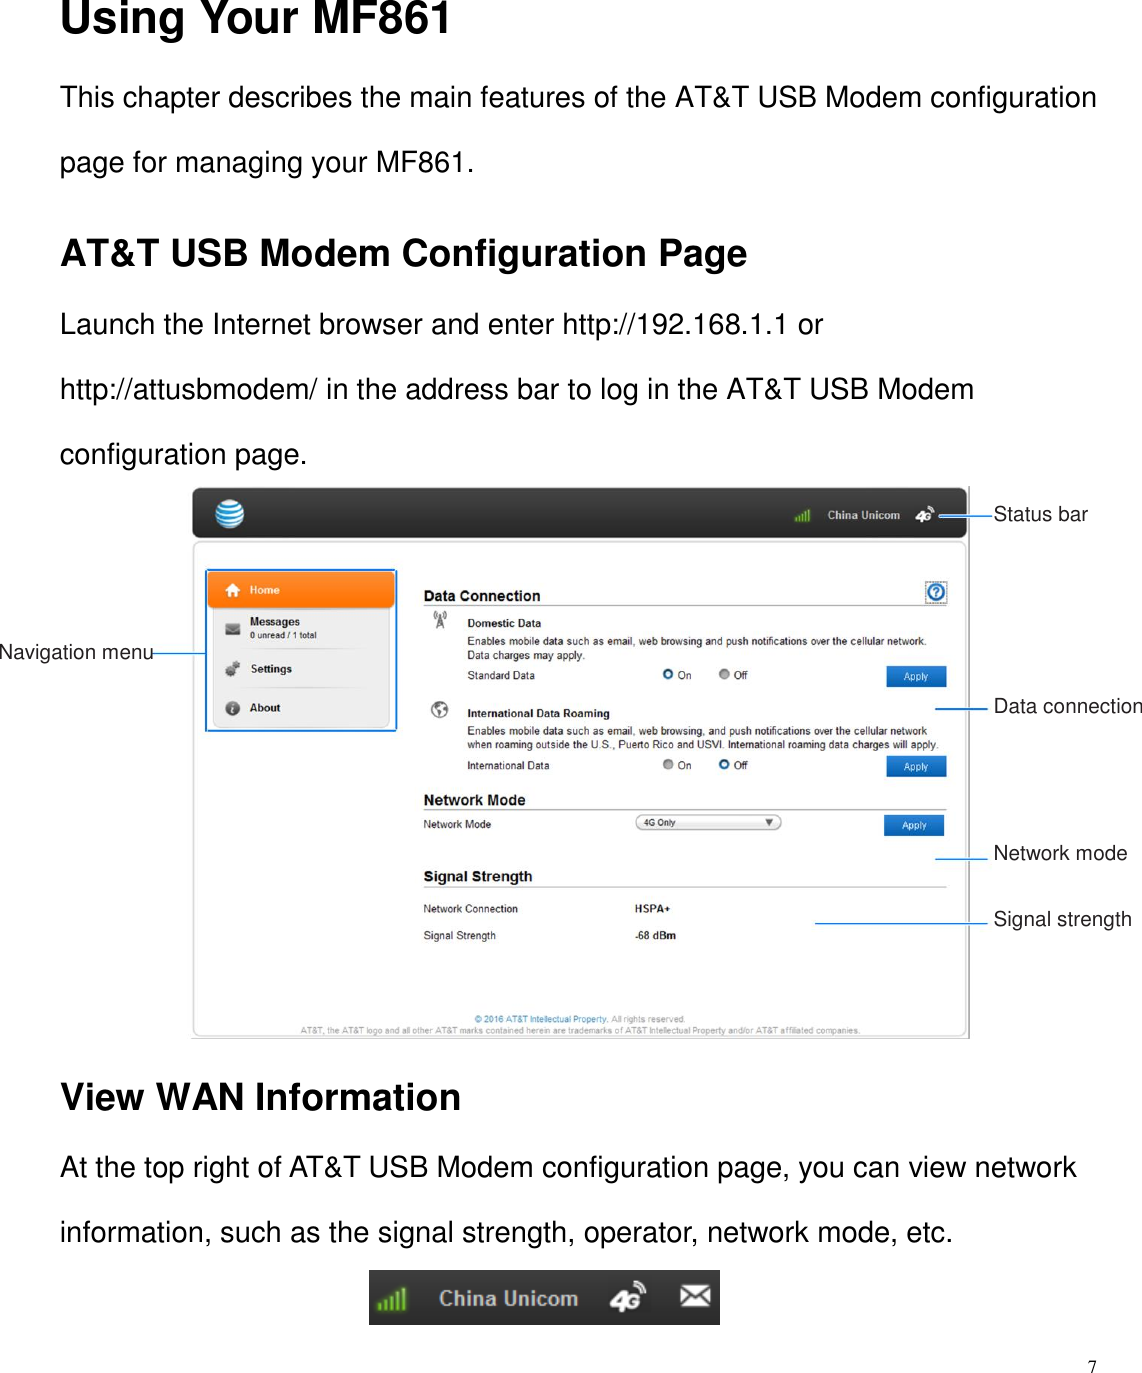 7  Using Your MF861 This chapter describes the main features of the AT&amp;T USB Modem configuration page for managing your MF861. AT&amp;T USB Modem Configuration Page Launch the Internet browser and enter http://192.168.1.1 or   http://attusbmodem/ in the address bar to log in the AT&amp;T USB Modem configuration page.              View WAN Information At the top right of AT&amp;T USB Modem configuration page, you can view network information, such as the signal strength, operator, network mode, etc.                                        Status bar Data connection Network mode Signal strength Navigation menu 